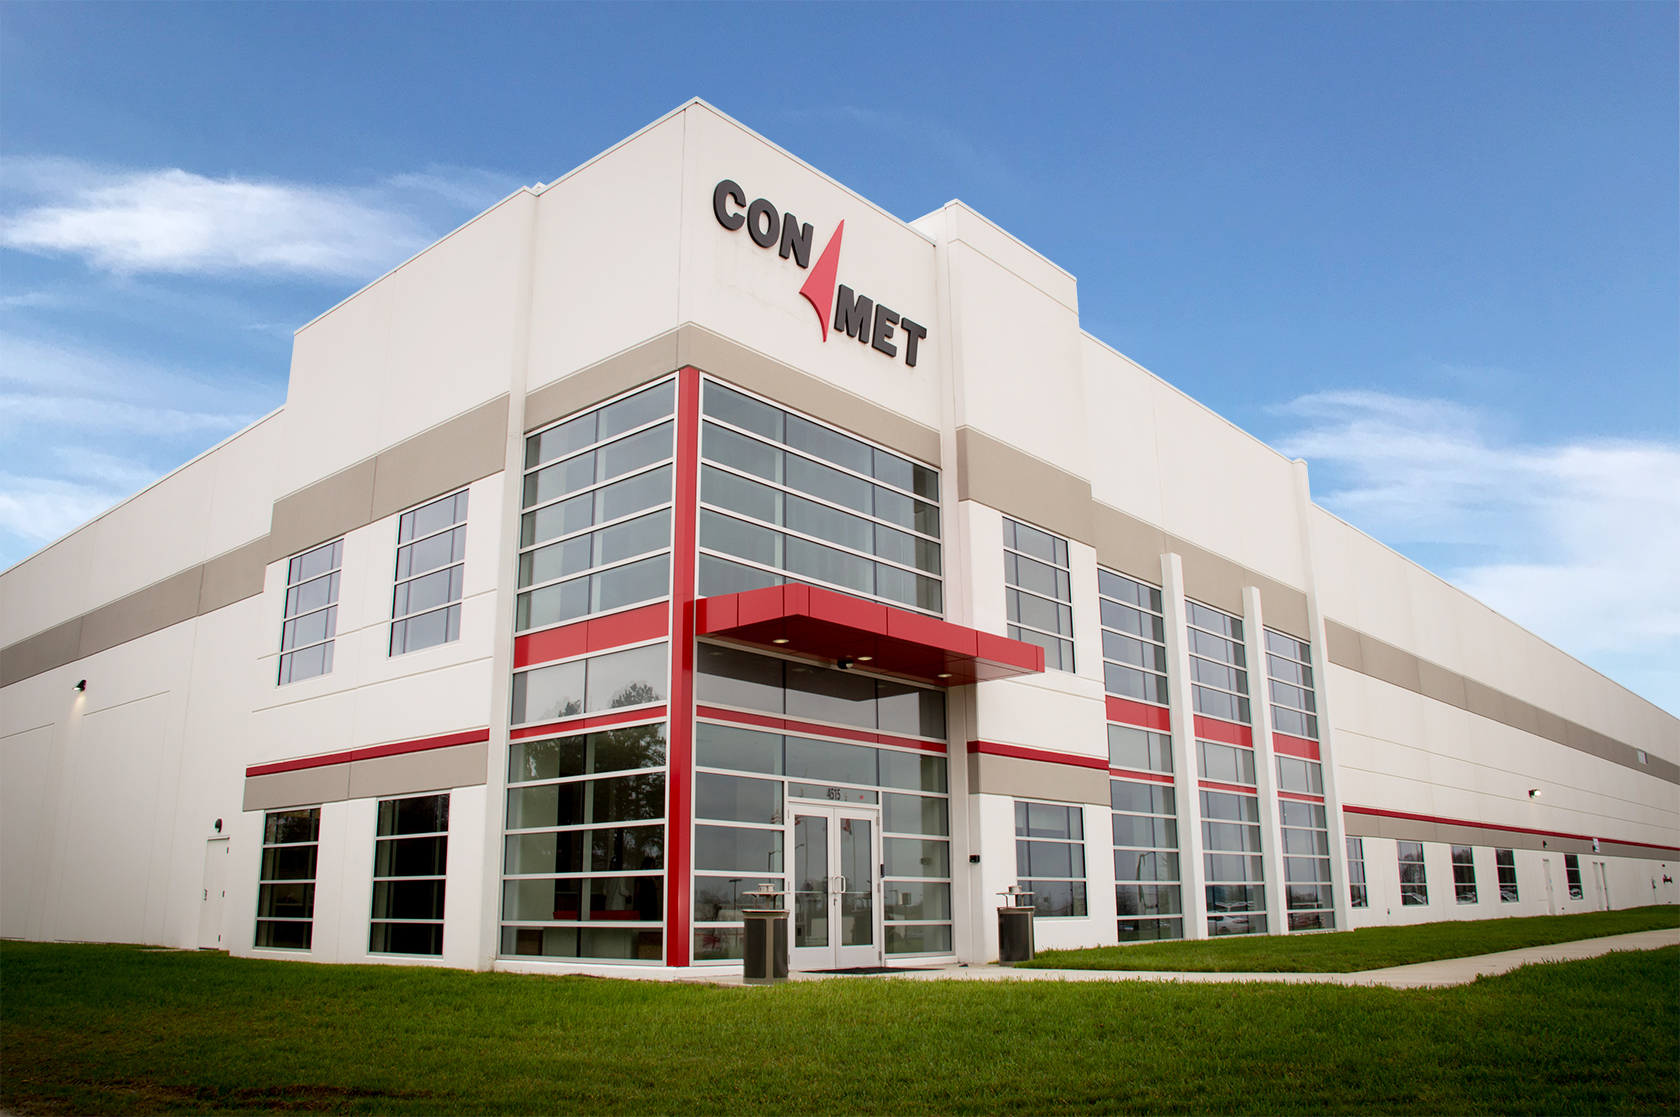 ConMet Opens New 253,000 sq/ft Facility in Monroe, NC